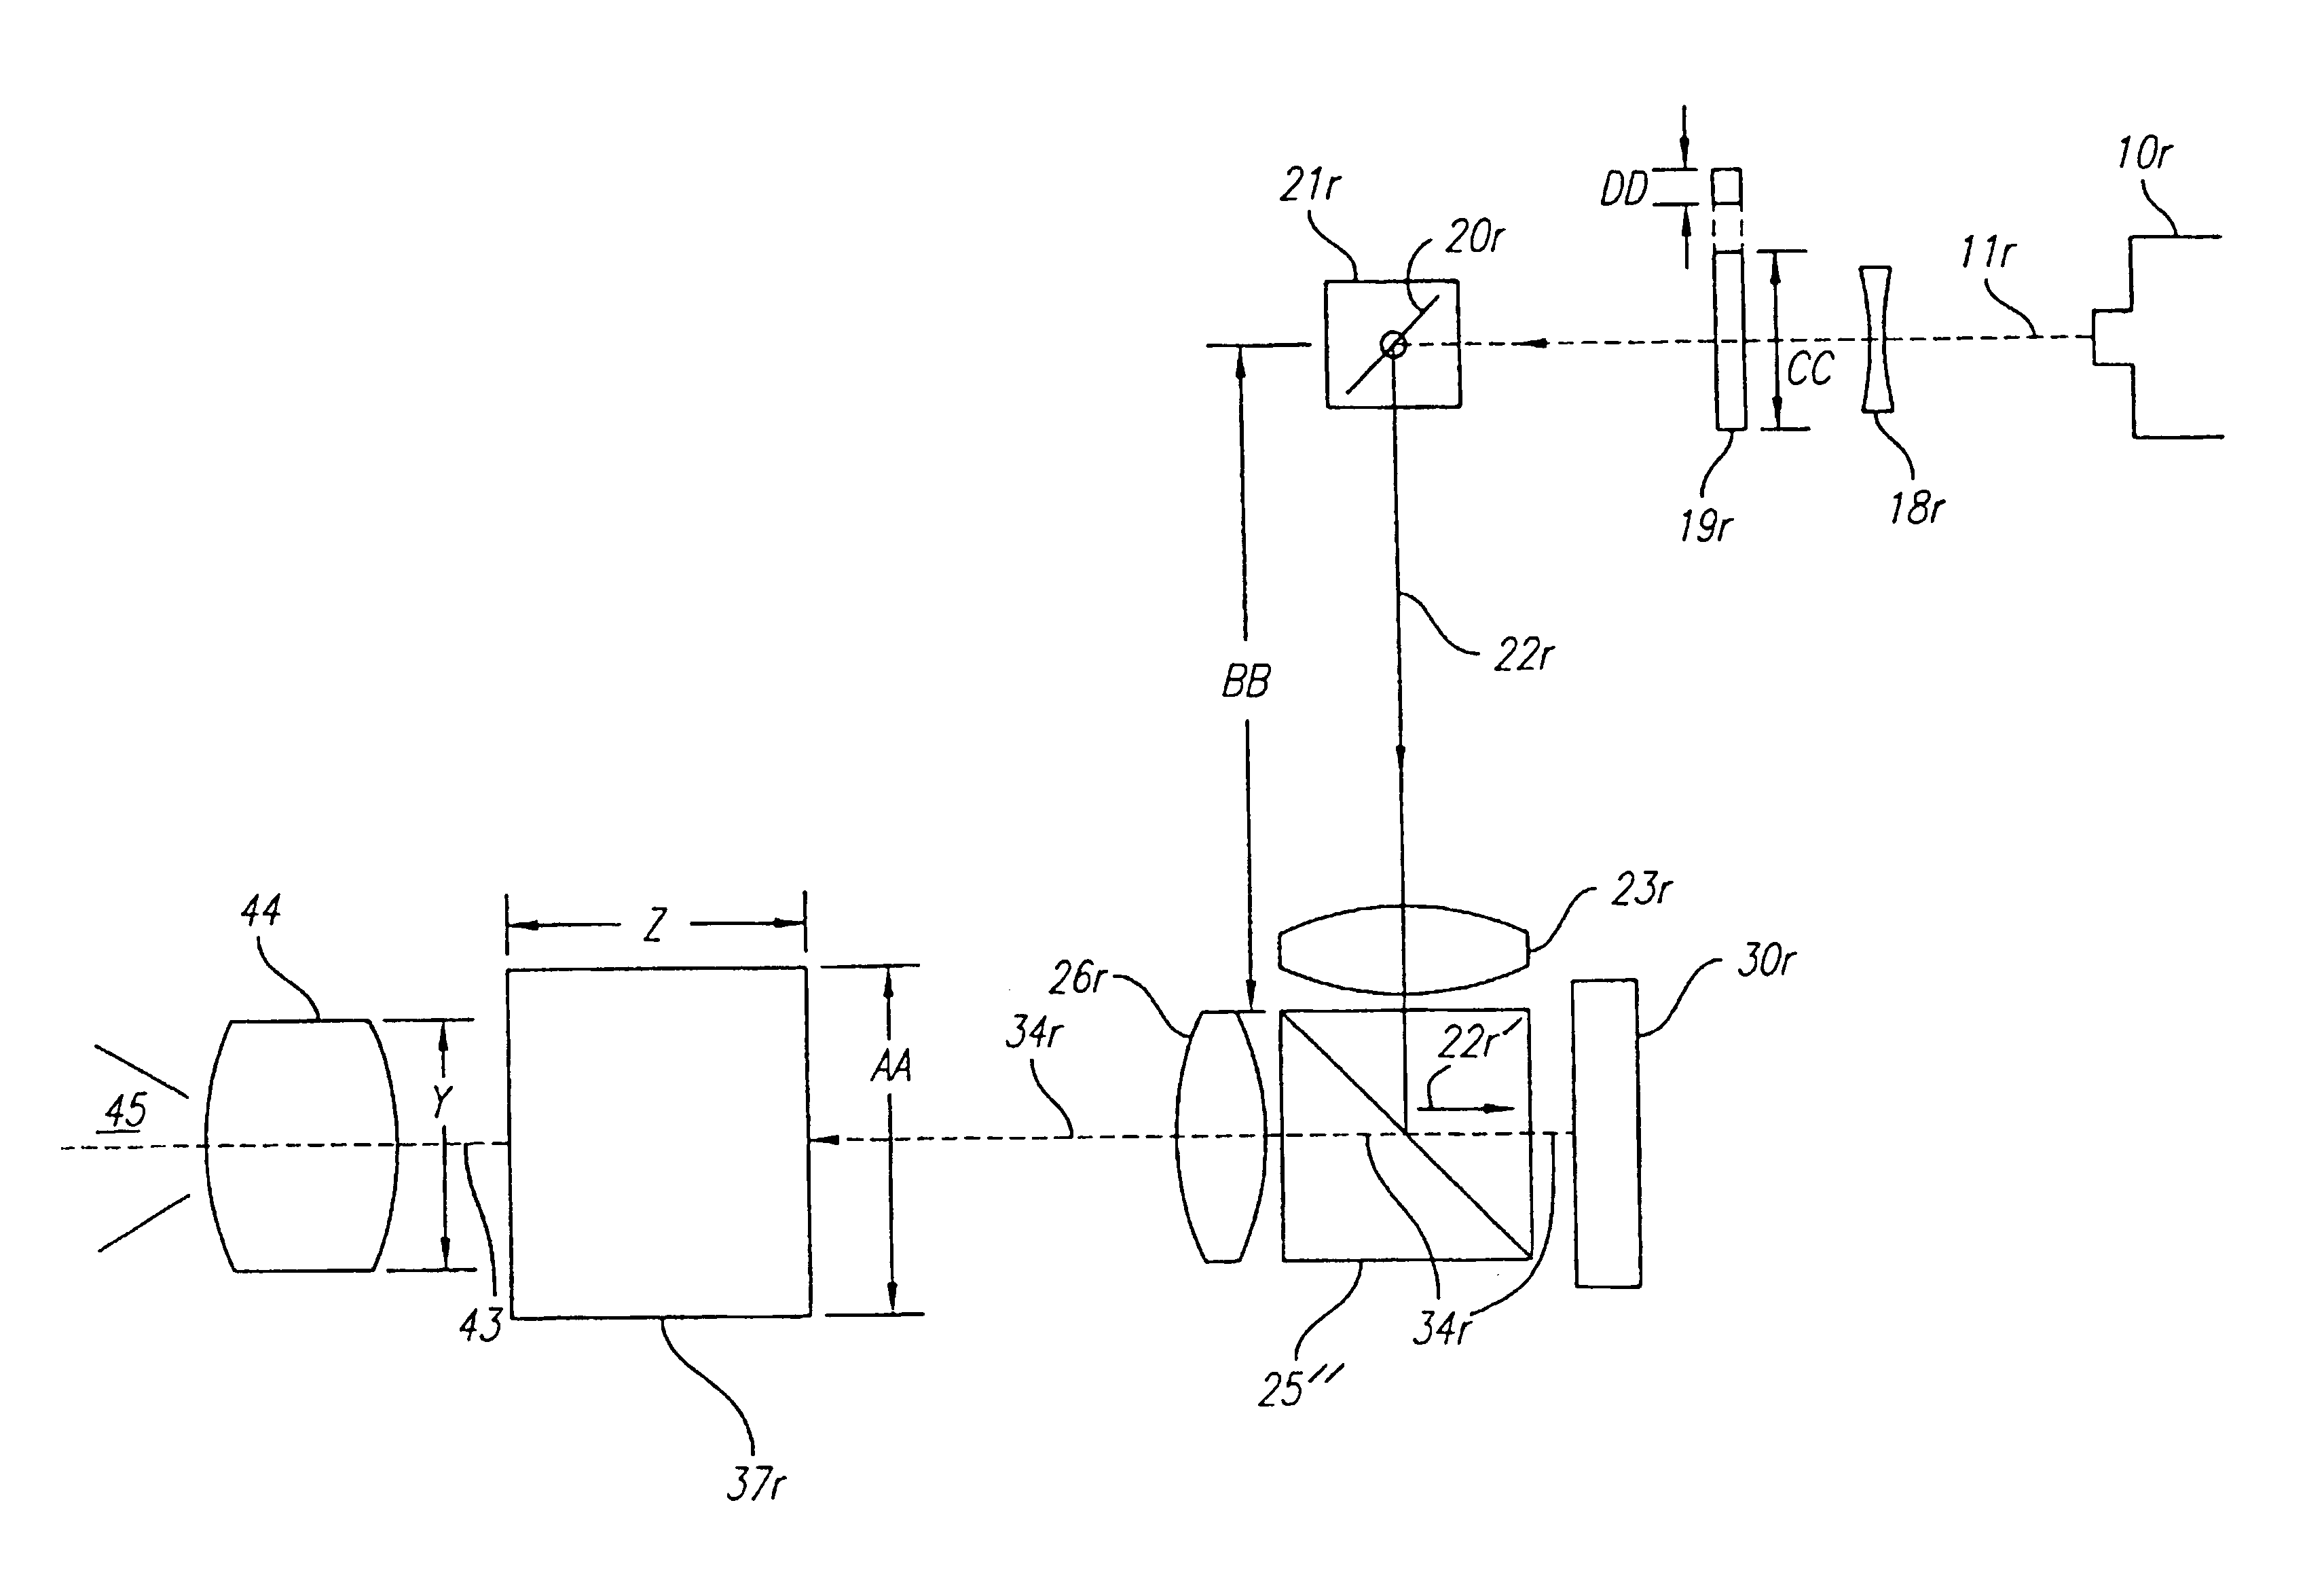 Laser projection apparatus with liquid-crystal light valves and scanning reading beam